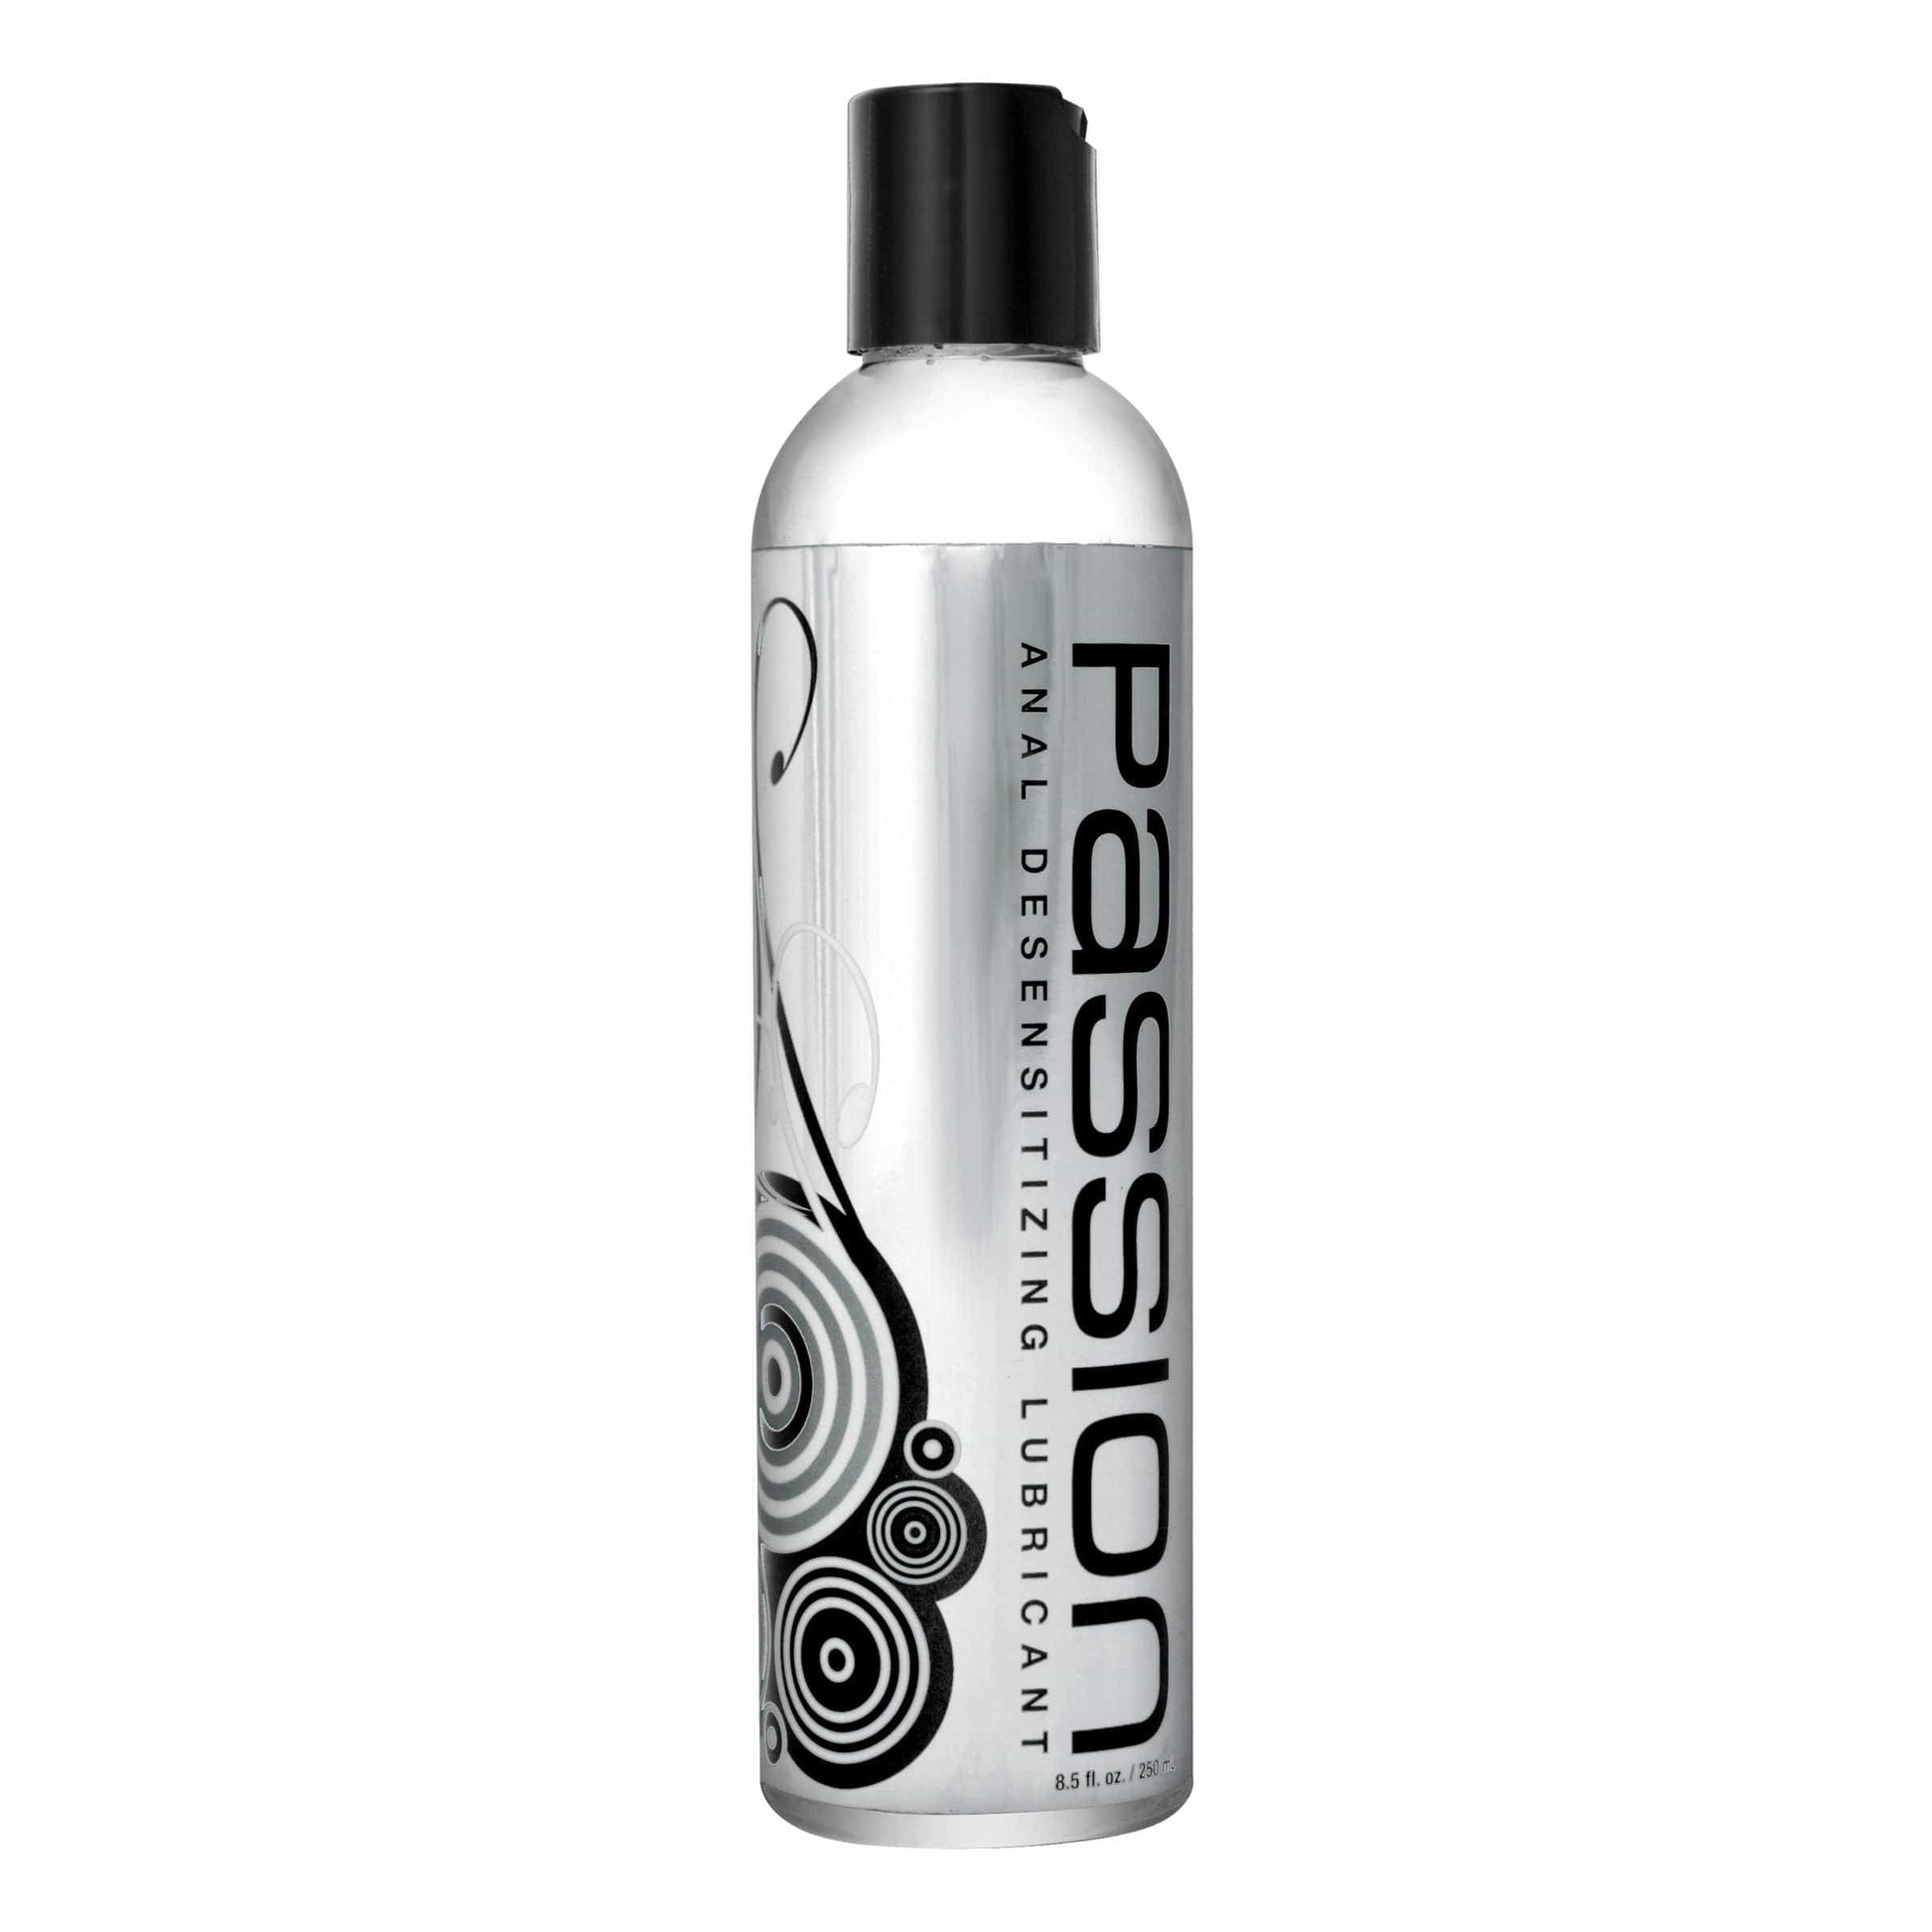 Passion Lubricants Water Based Lubricant 8.5 oz. Passion Anal Desensitizing Lubricant with Lidocaine at the Haus of Shag